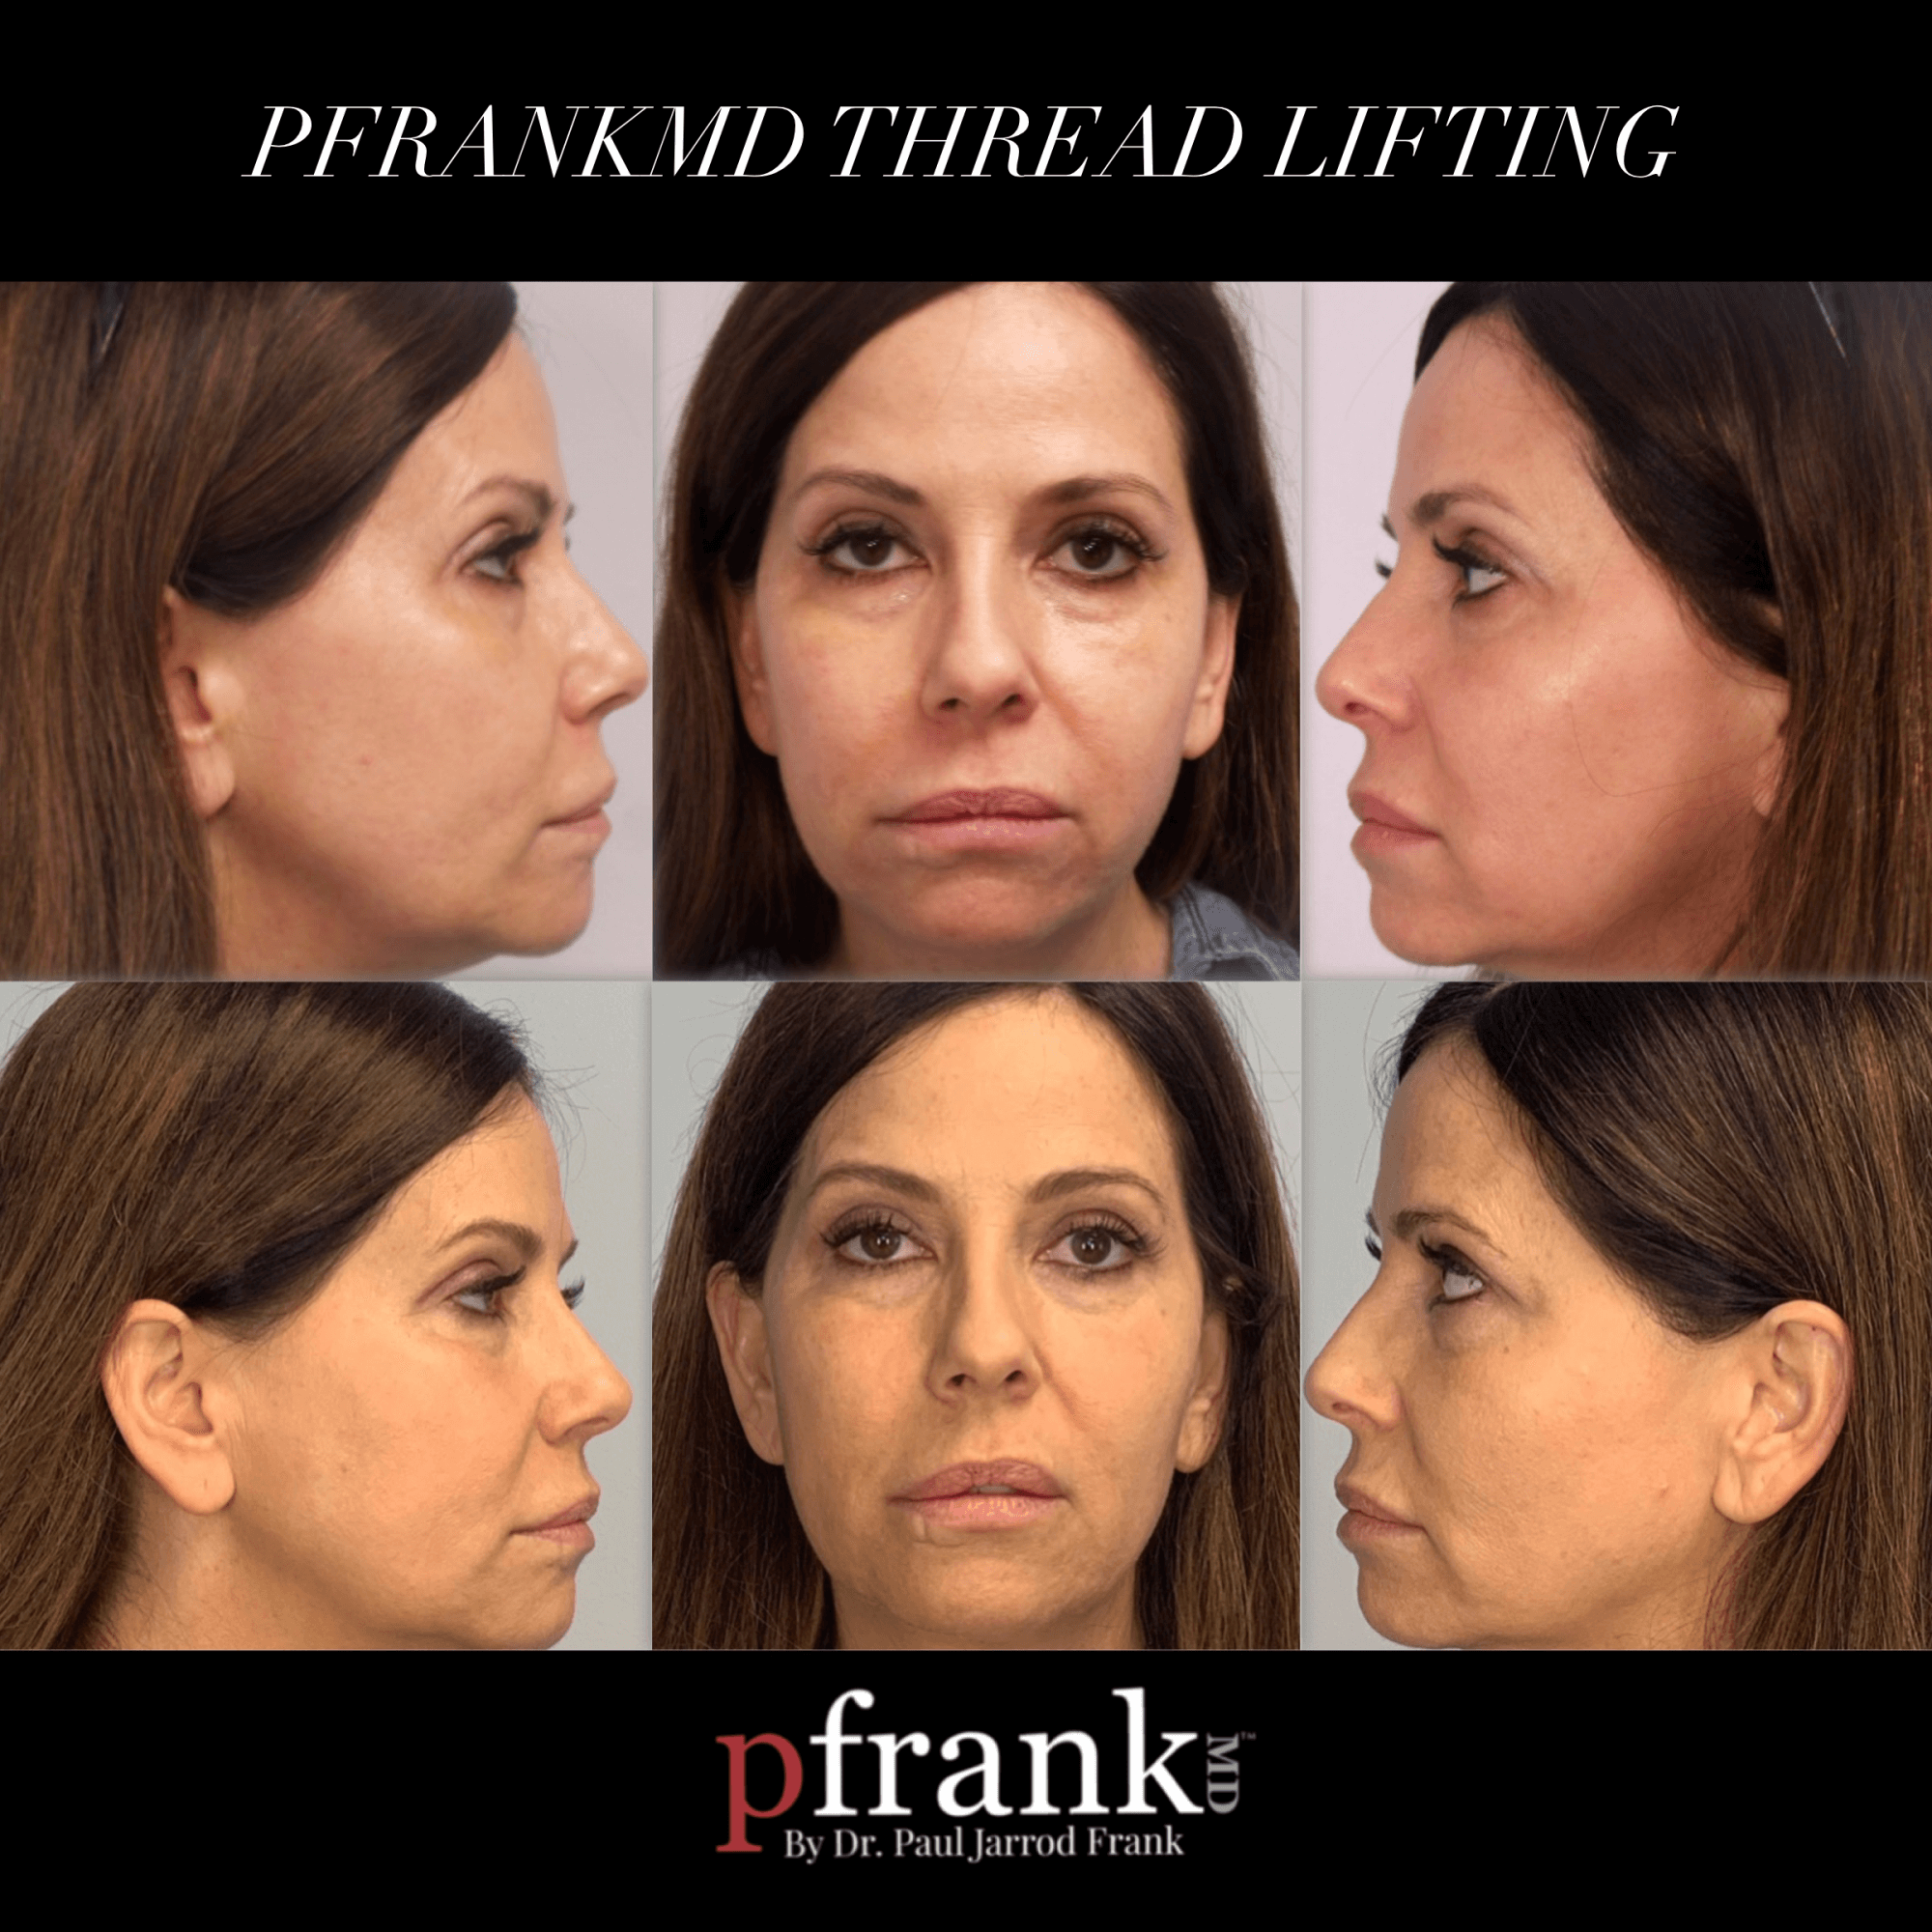 ThreadLift Before and After photos by Dr. Paul Jarrod Frank of PFRANKMD in New York City, NY